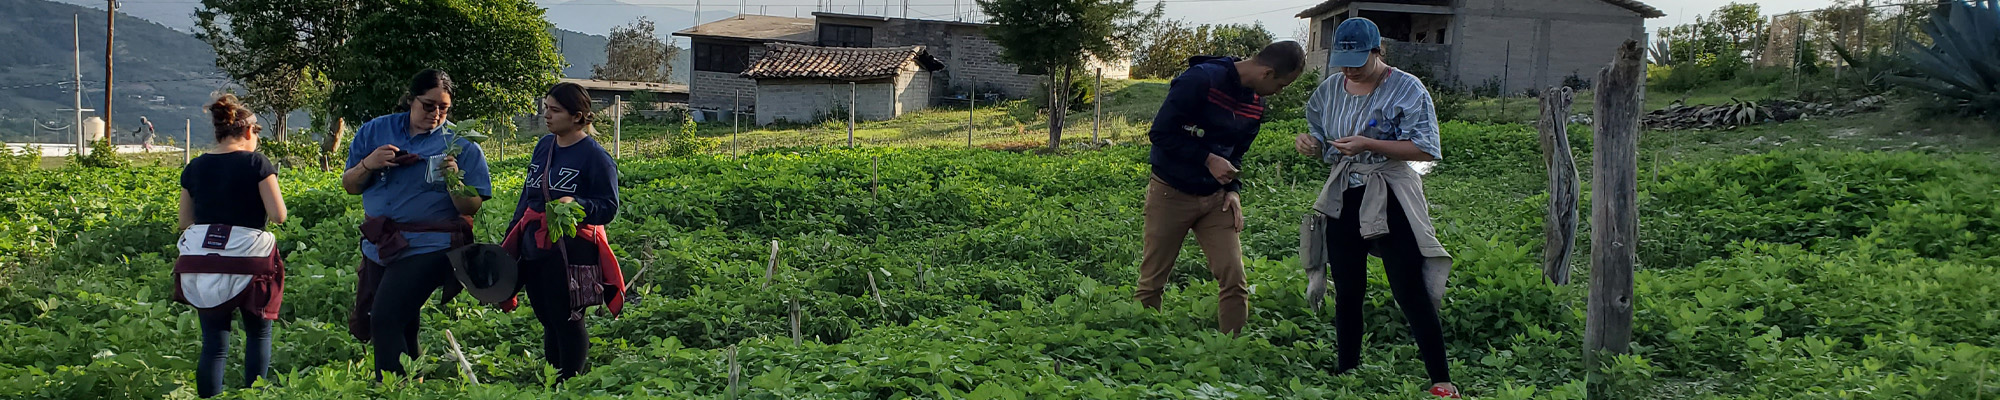 students in Oaxaca, Mexico picking vegetables in field